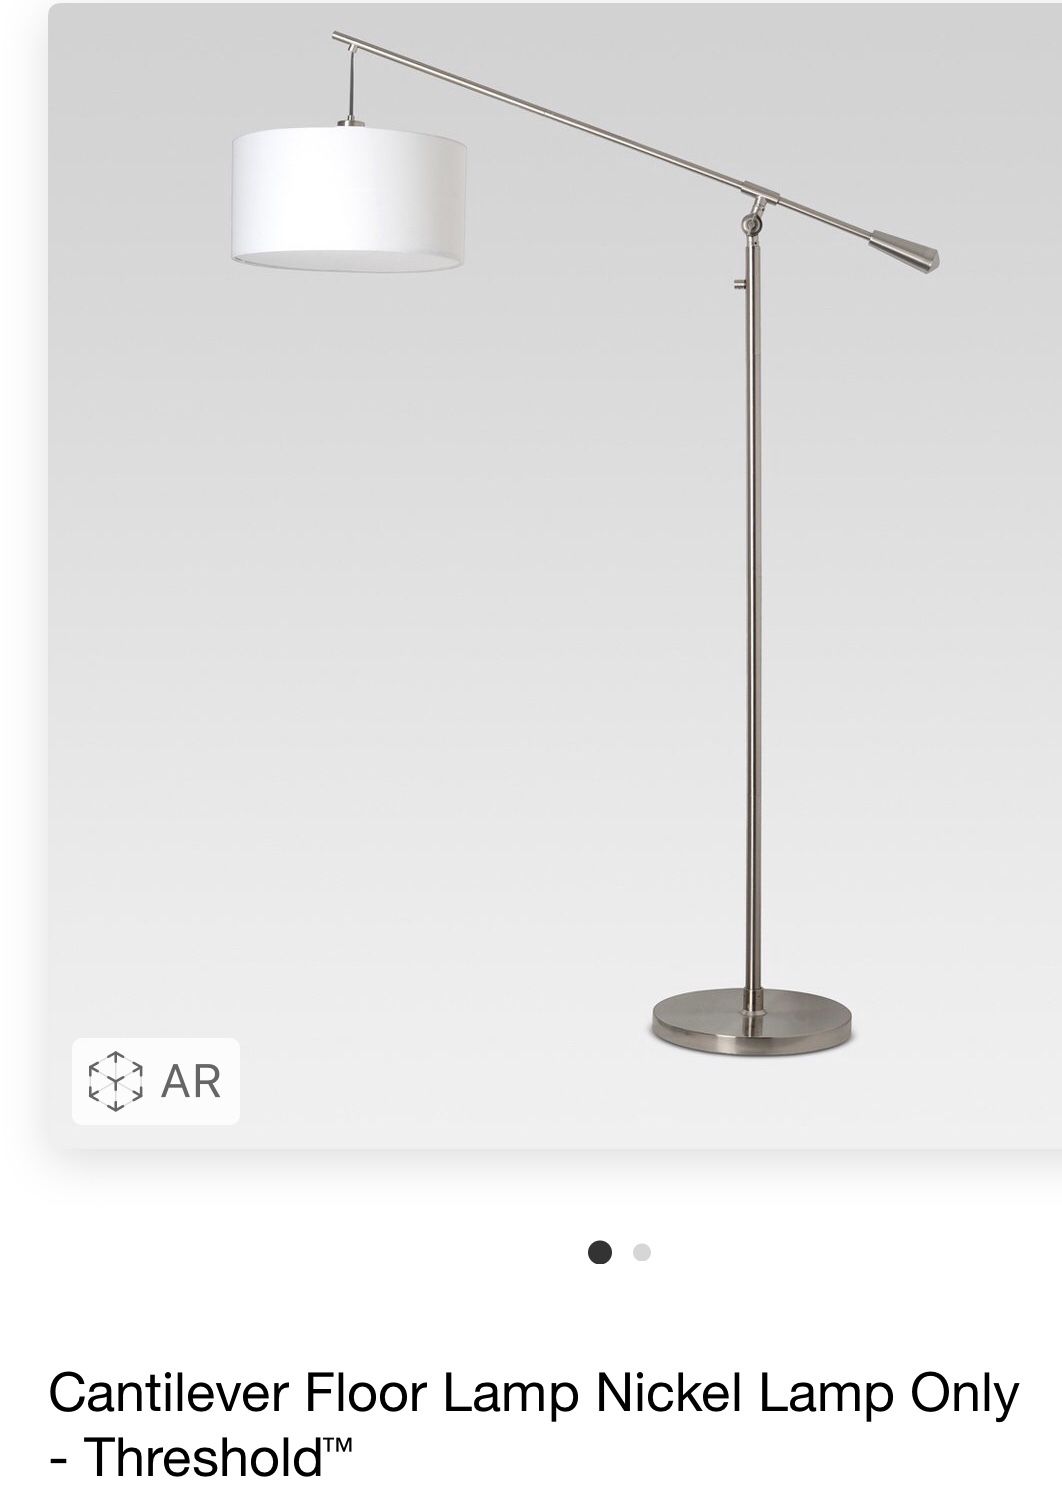 Brand New Cantilever Nickel Floor Lamp by Threshold